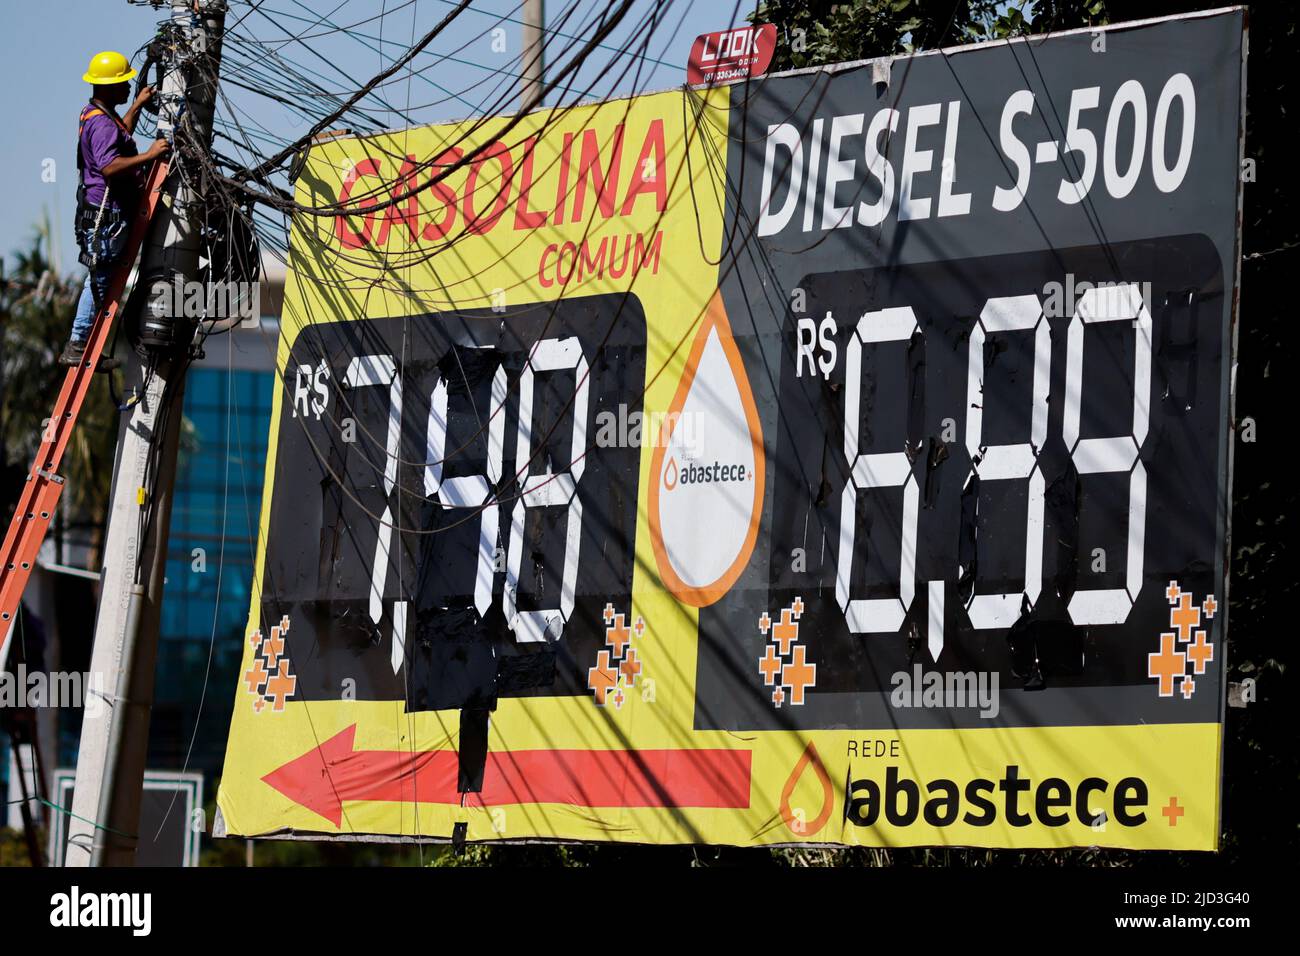 Gasoline and diesel price are displayed near a gas station following the announcement of updated fuel prices at at the Brazilian oil company Petrobras in Brasilia, Brazil June 17, 2022. REUTERS/Ueslei Marcelino Stock Photo